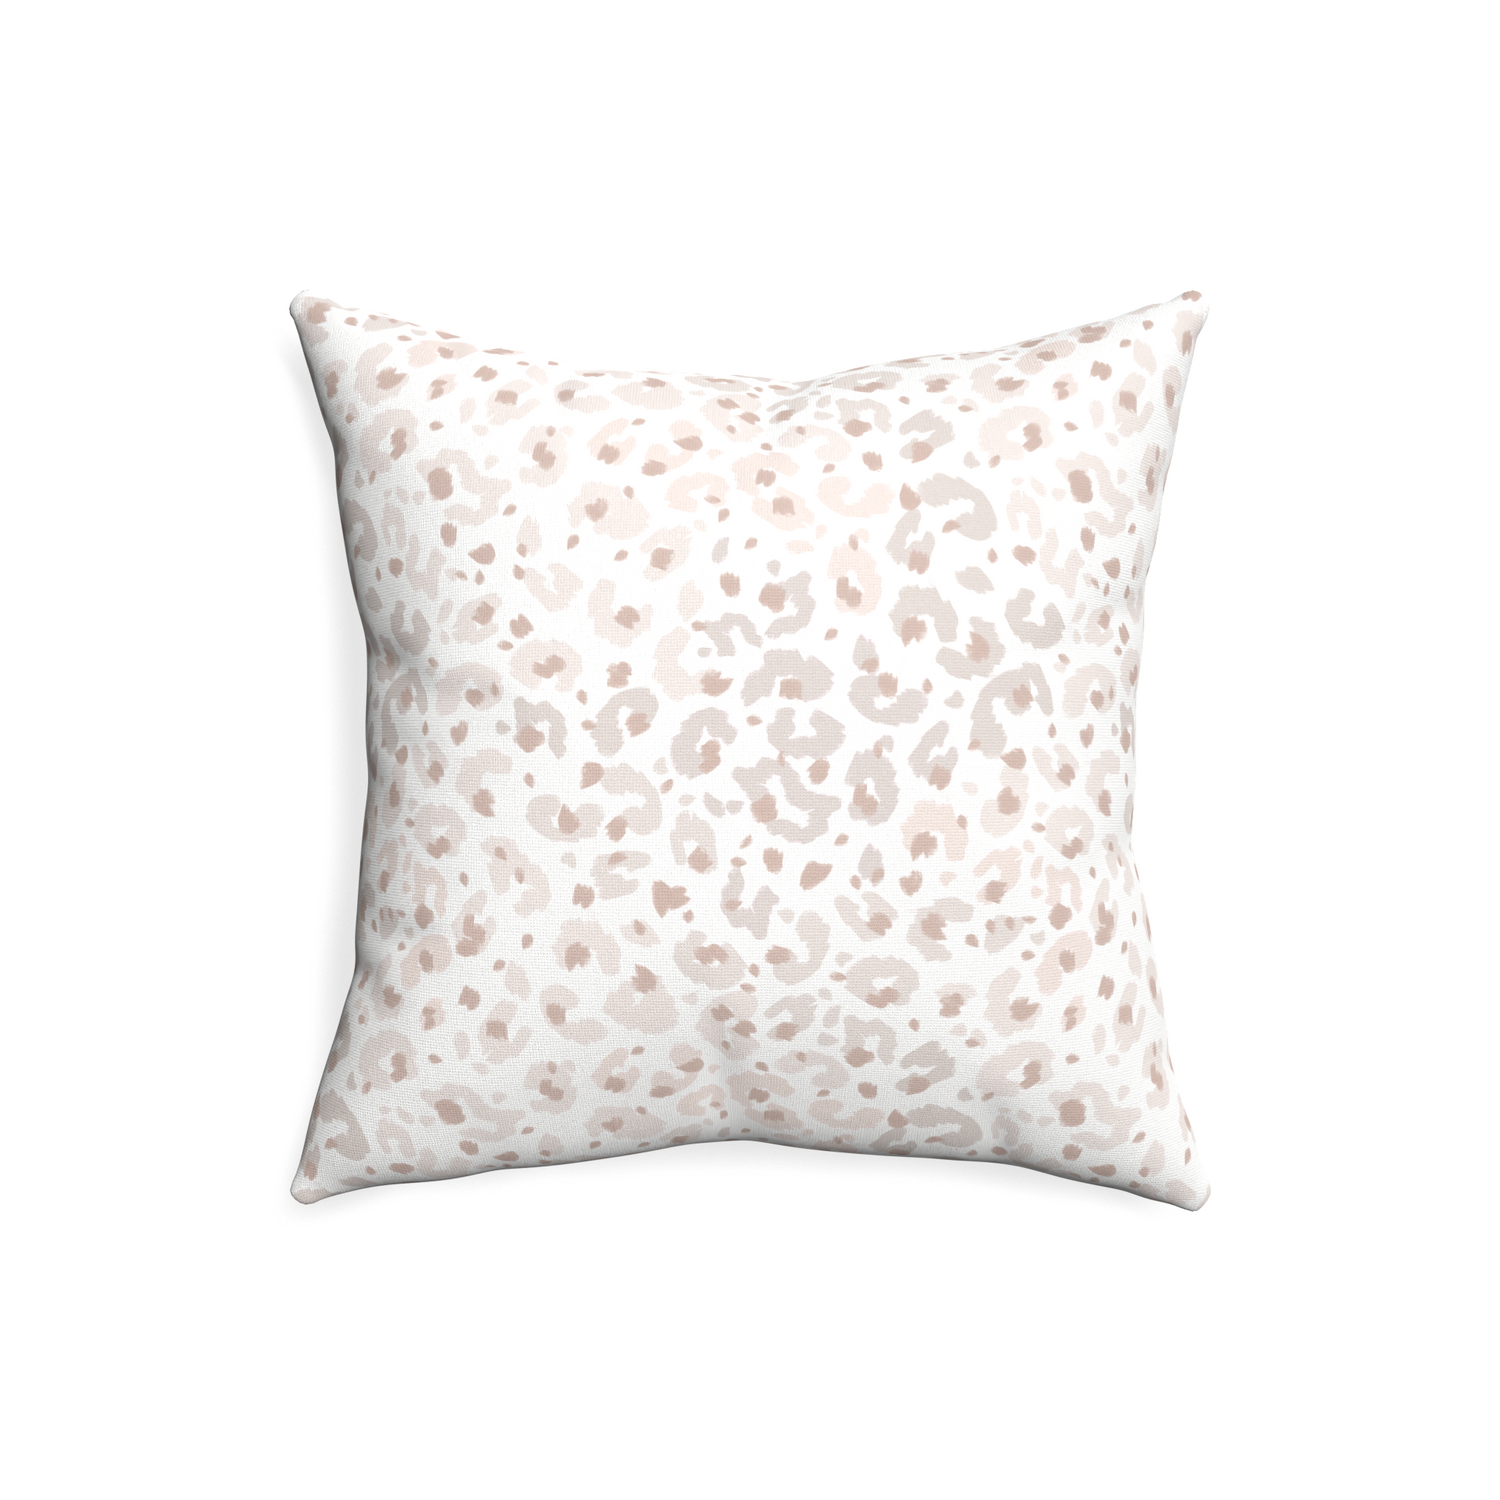 20-square rosie custom beige animal printpillow with none on white background